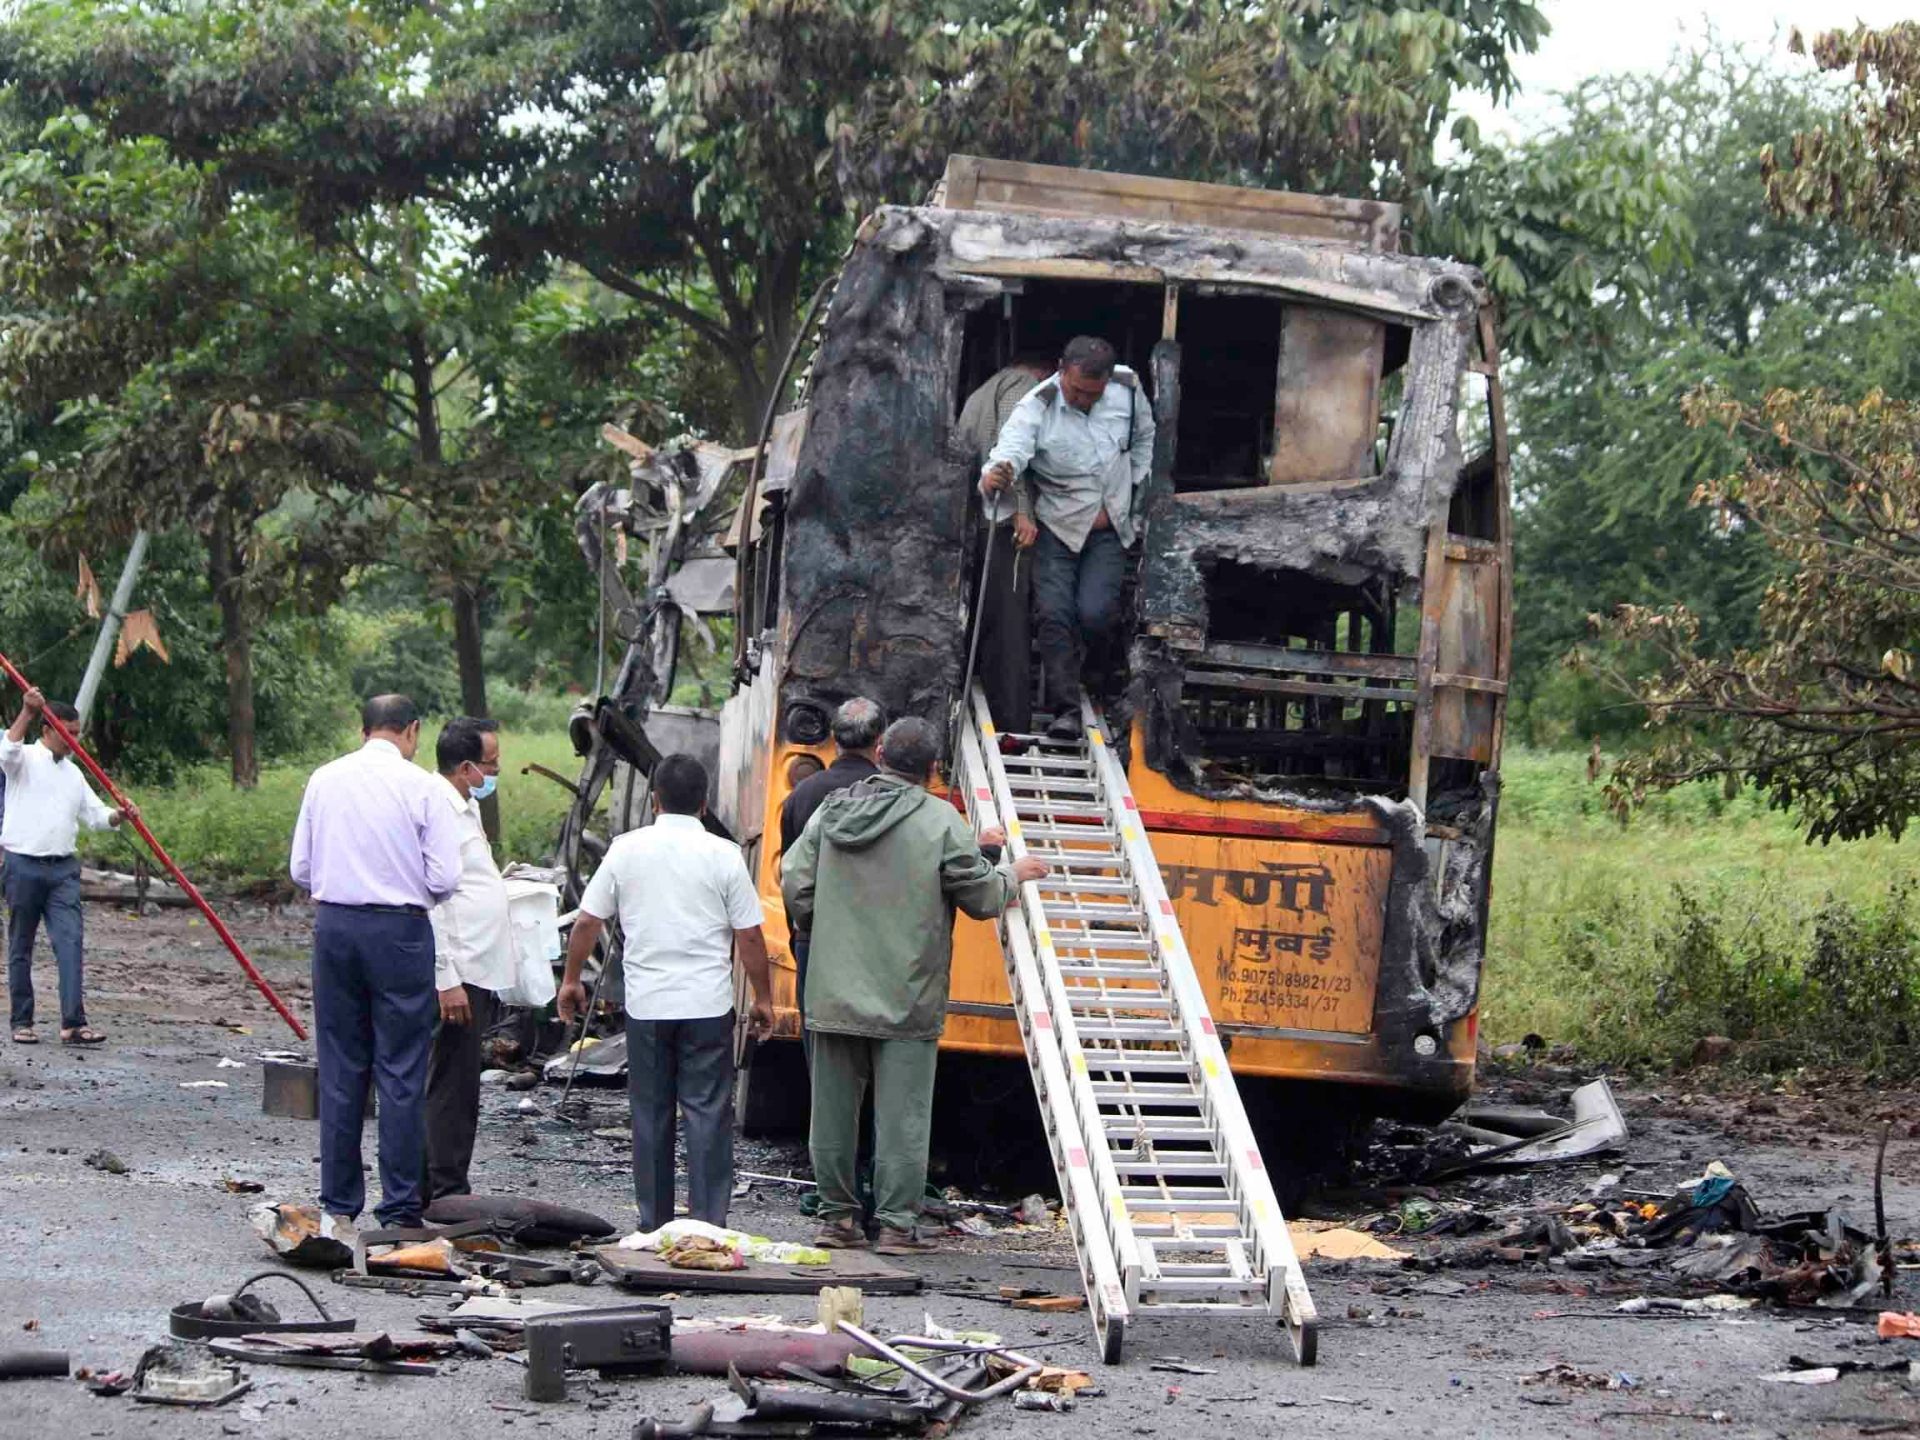 bus-catches-fire-after-collision-with-truck-killing-12-in-india